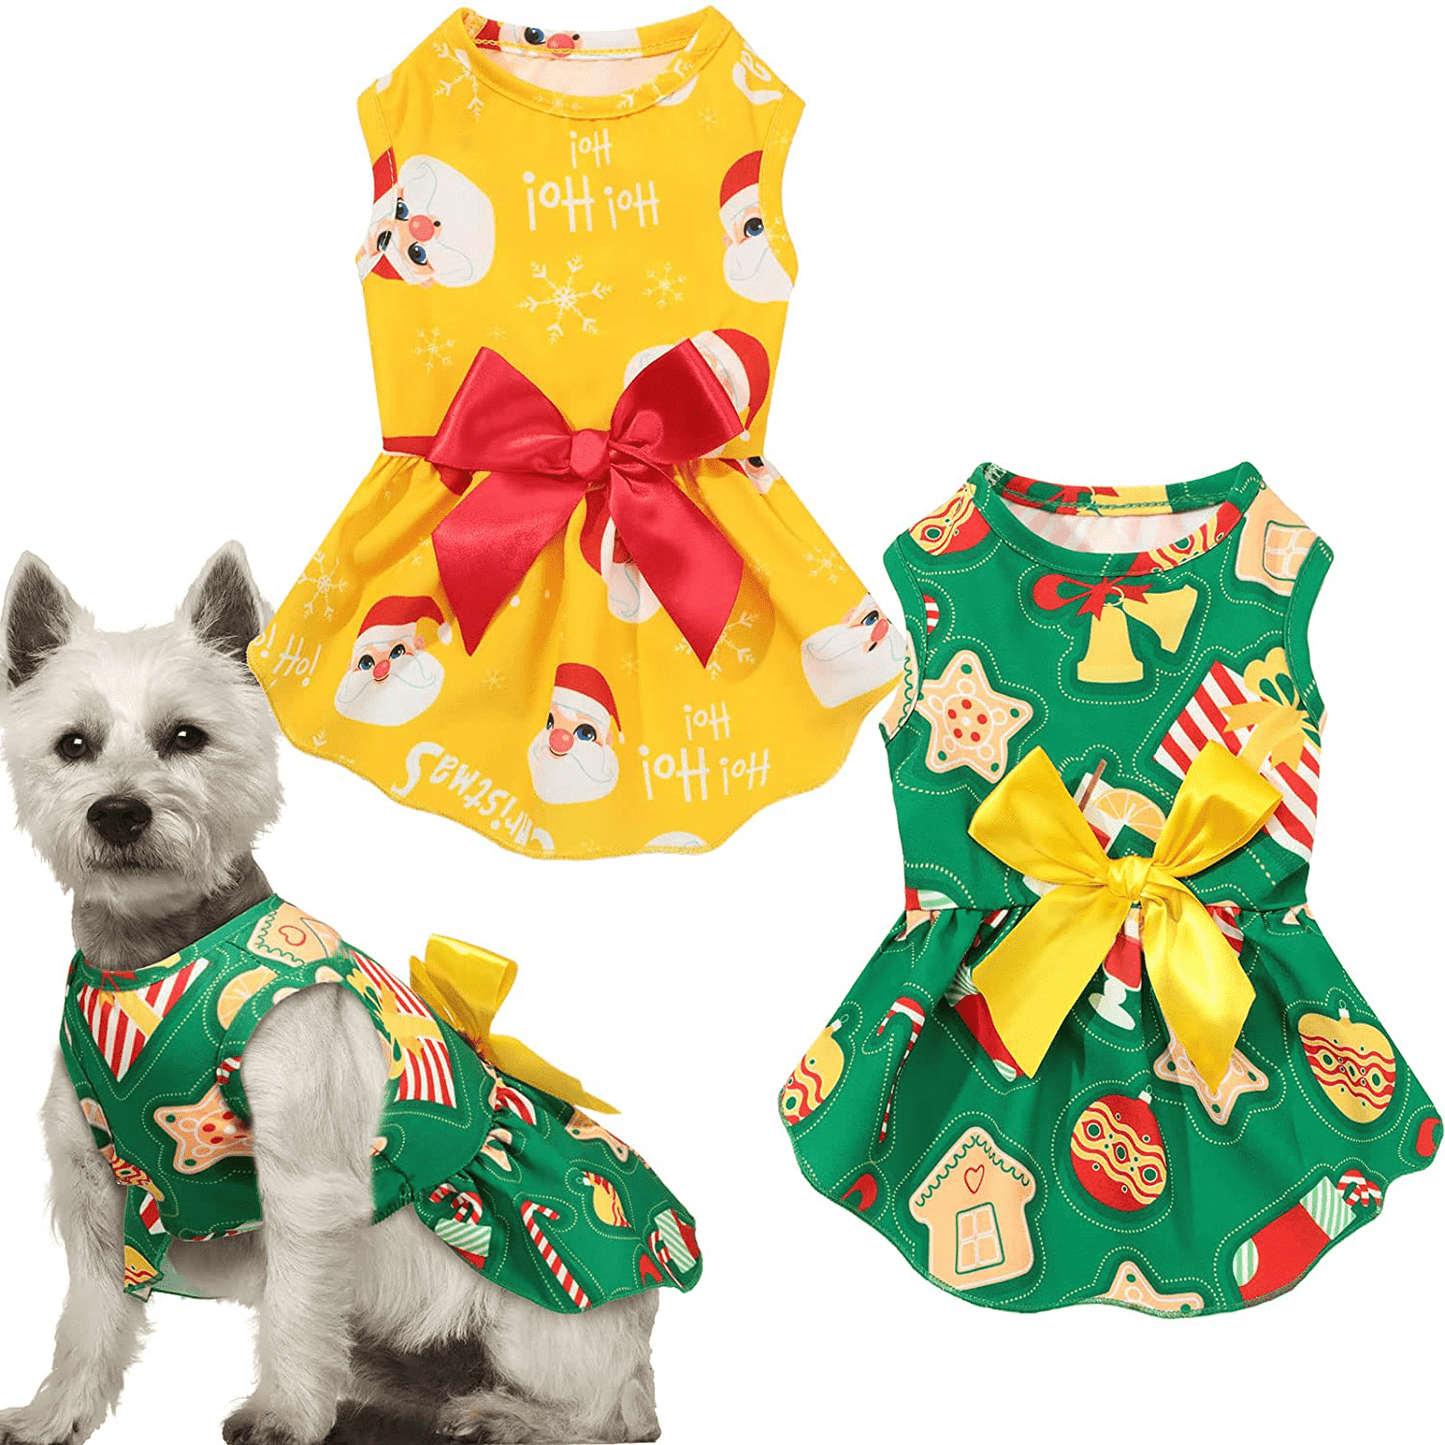 2 Pieces Christmas Dog Dresses Holiday Theme Dog Clothes Cat Apparel Cute Pet Clothes Dog Outfit Doggie Bowknot Dresses Puppy Party Costumes for Dogs Cats Pet